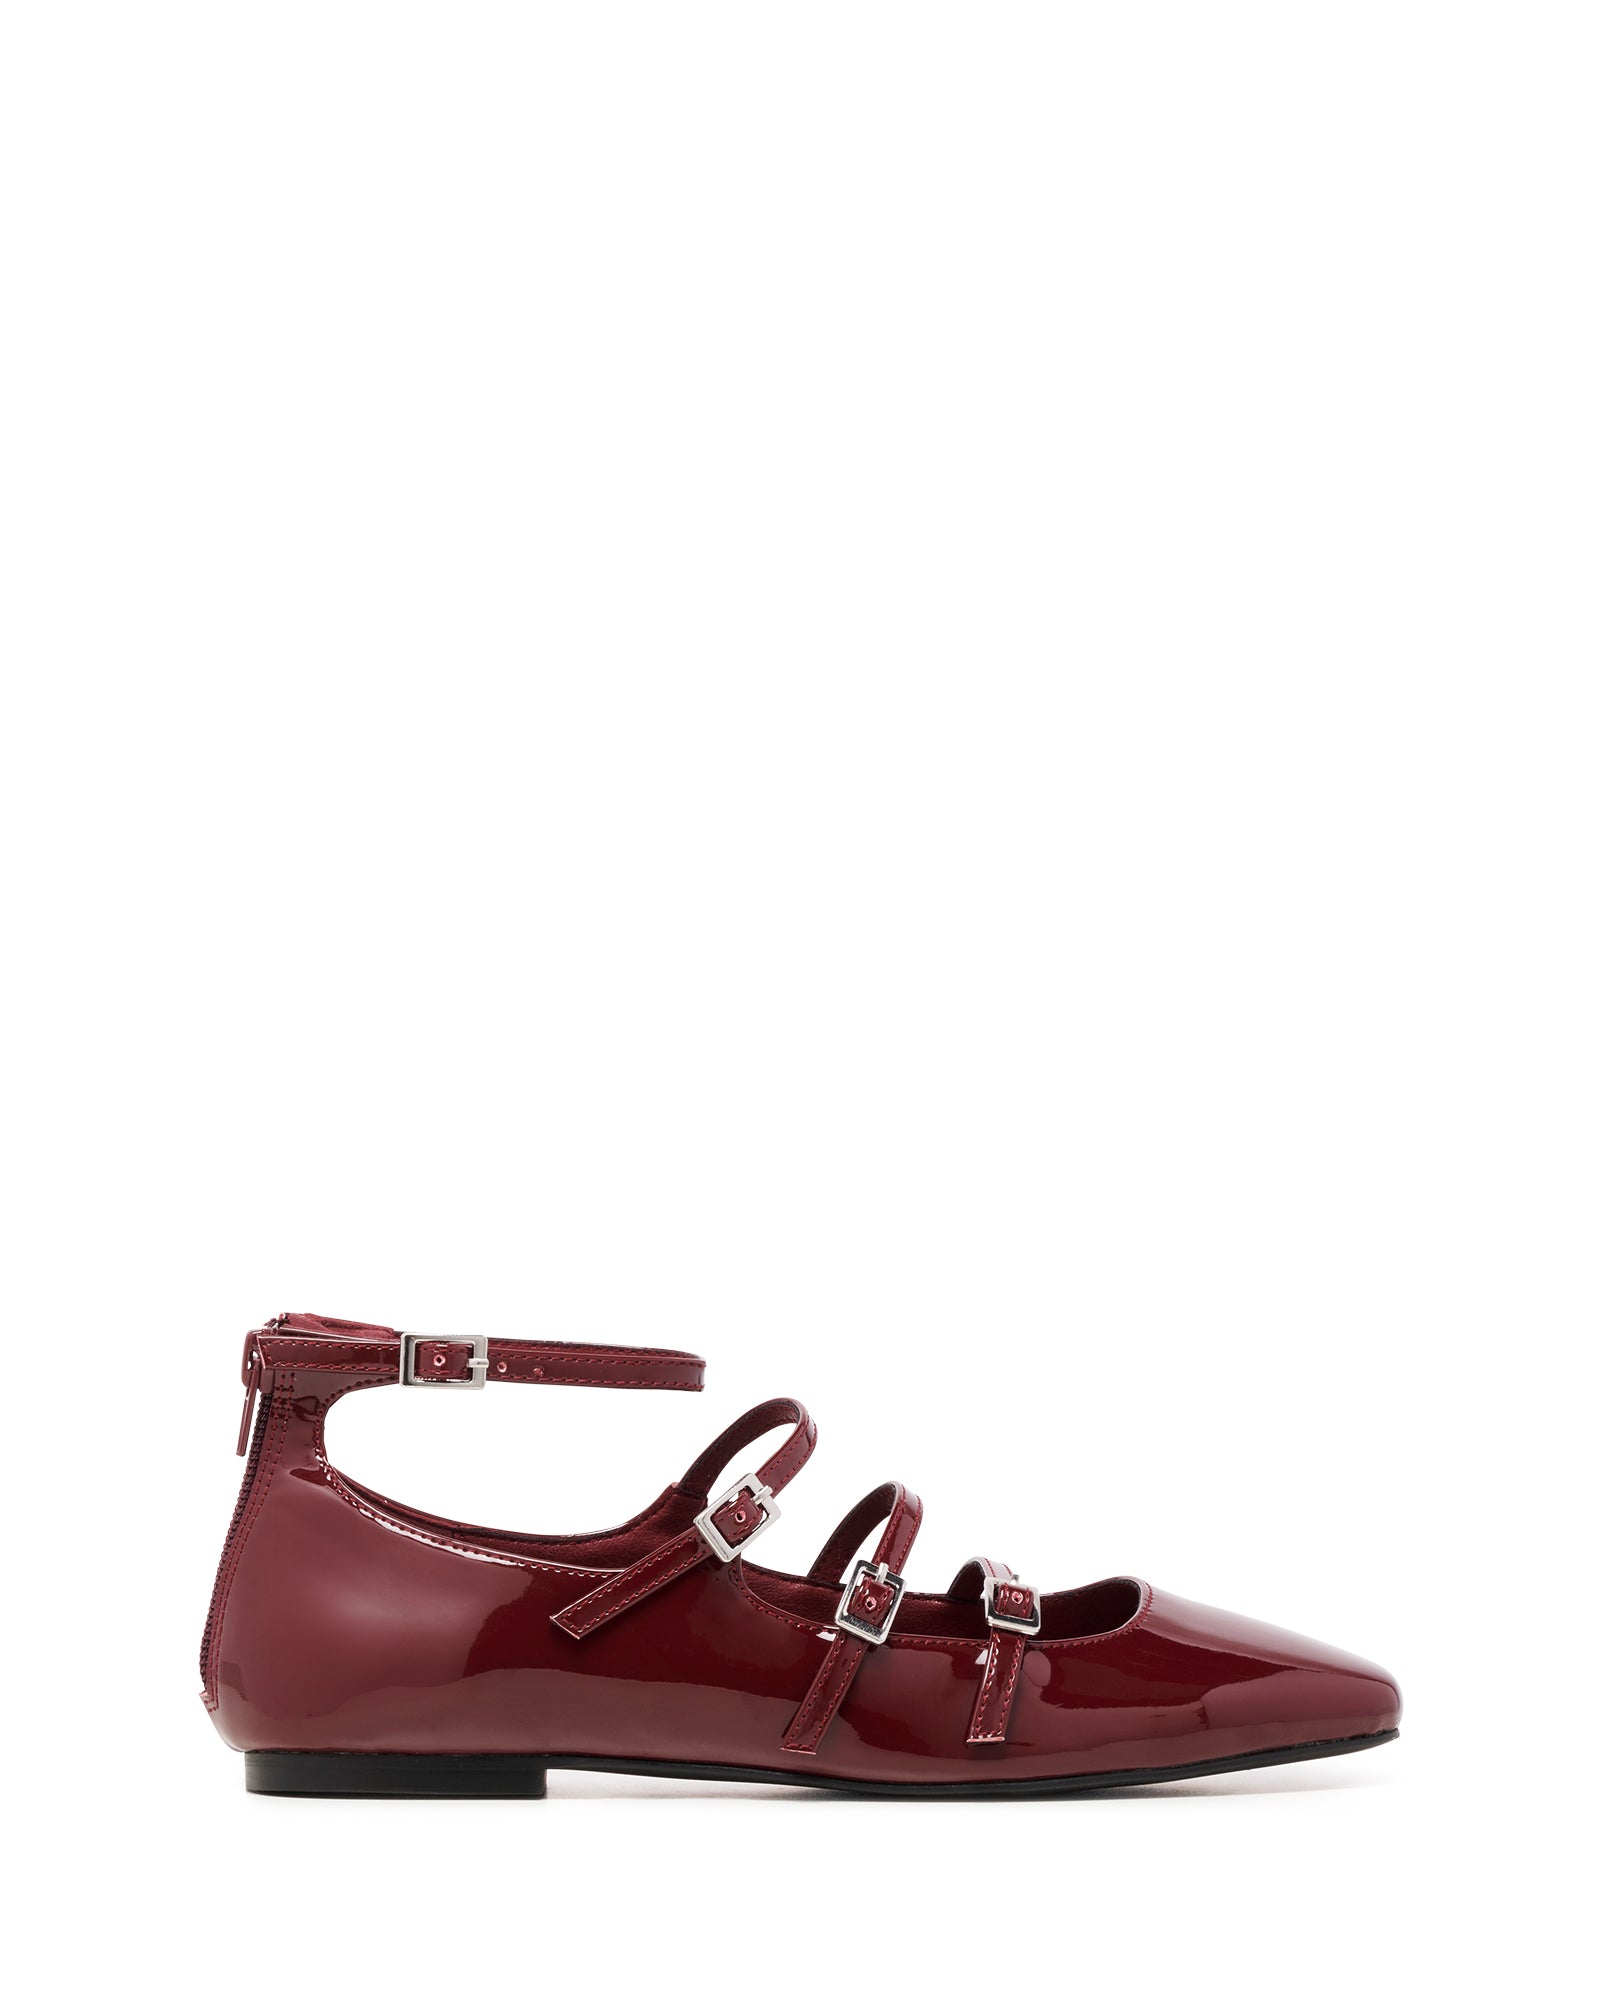 Therapy Shoes Odile Cherry Patent | Women's Flat | Ballet | Buckle